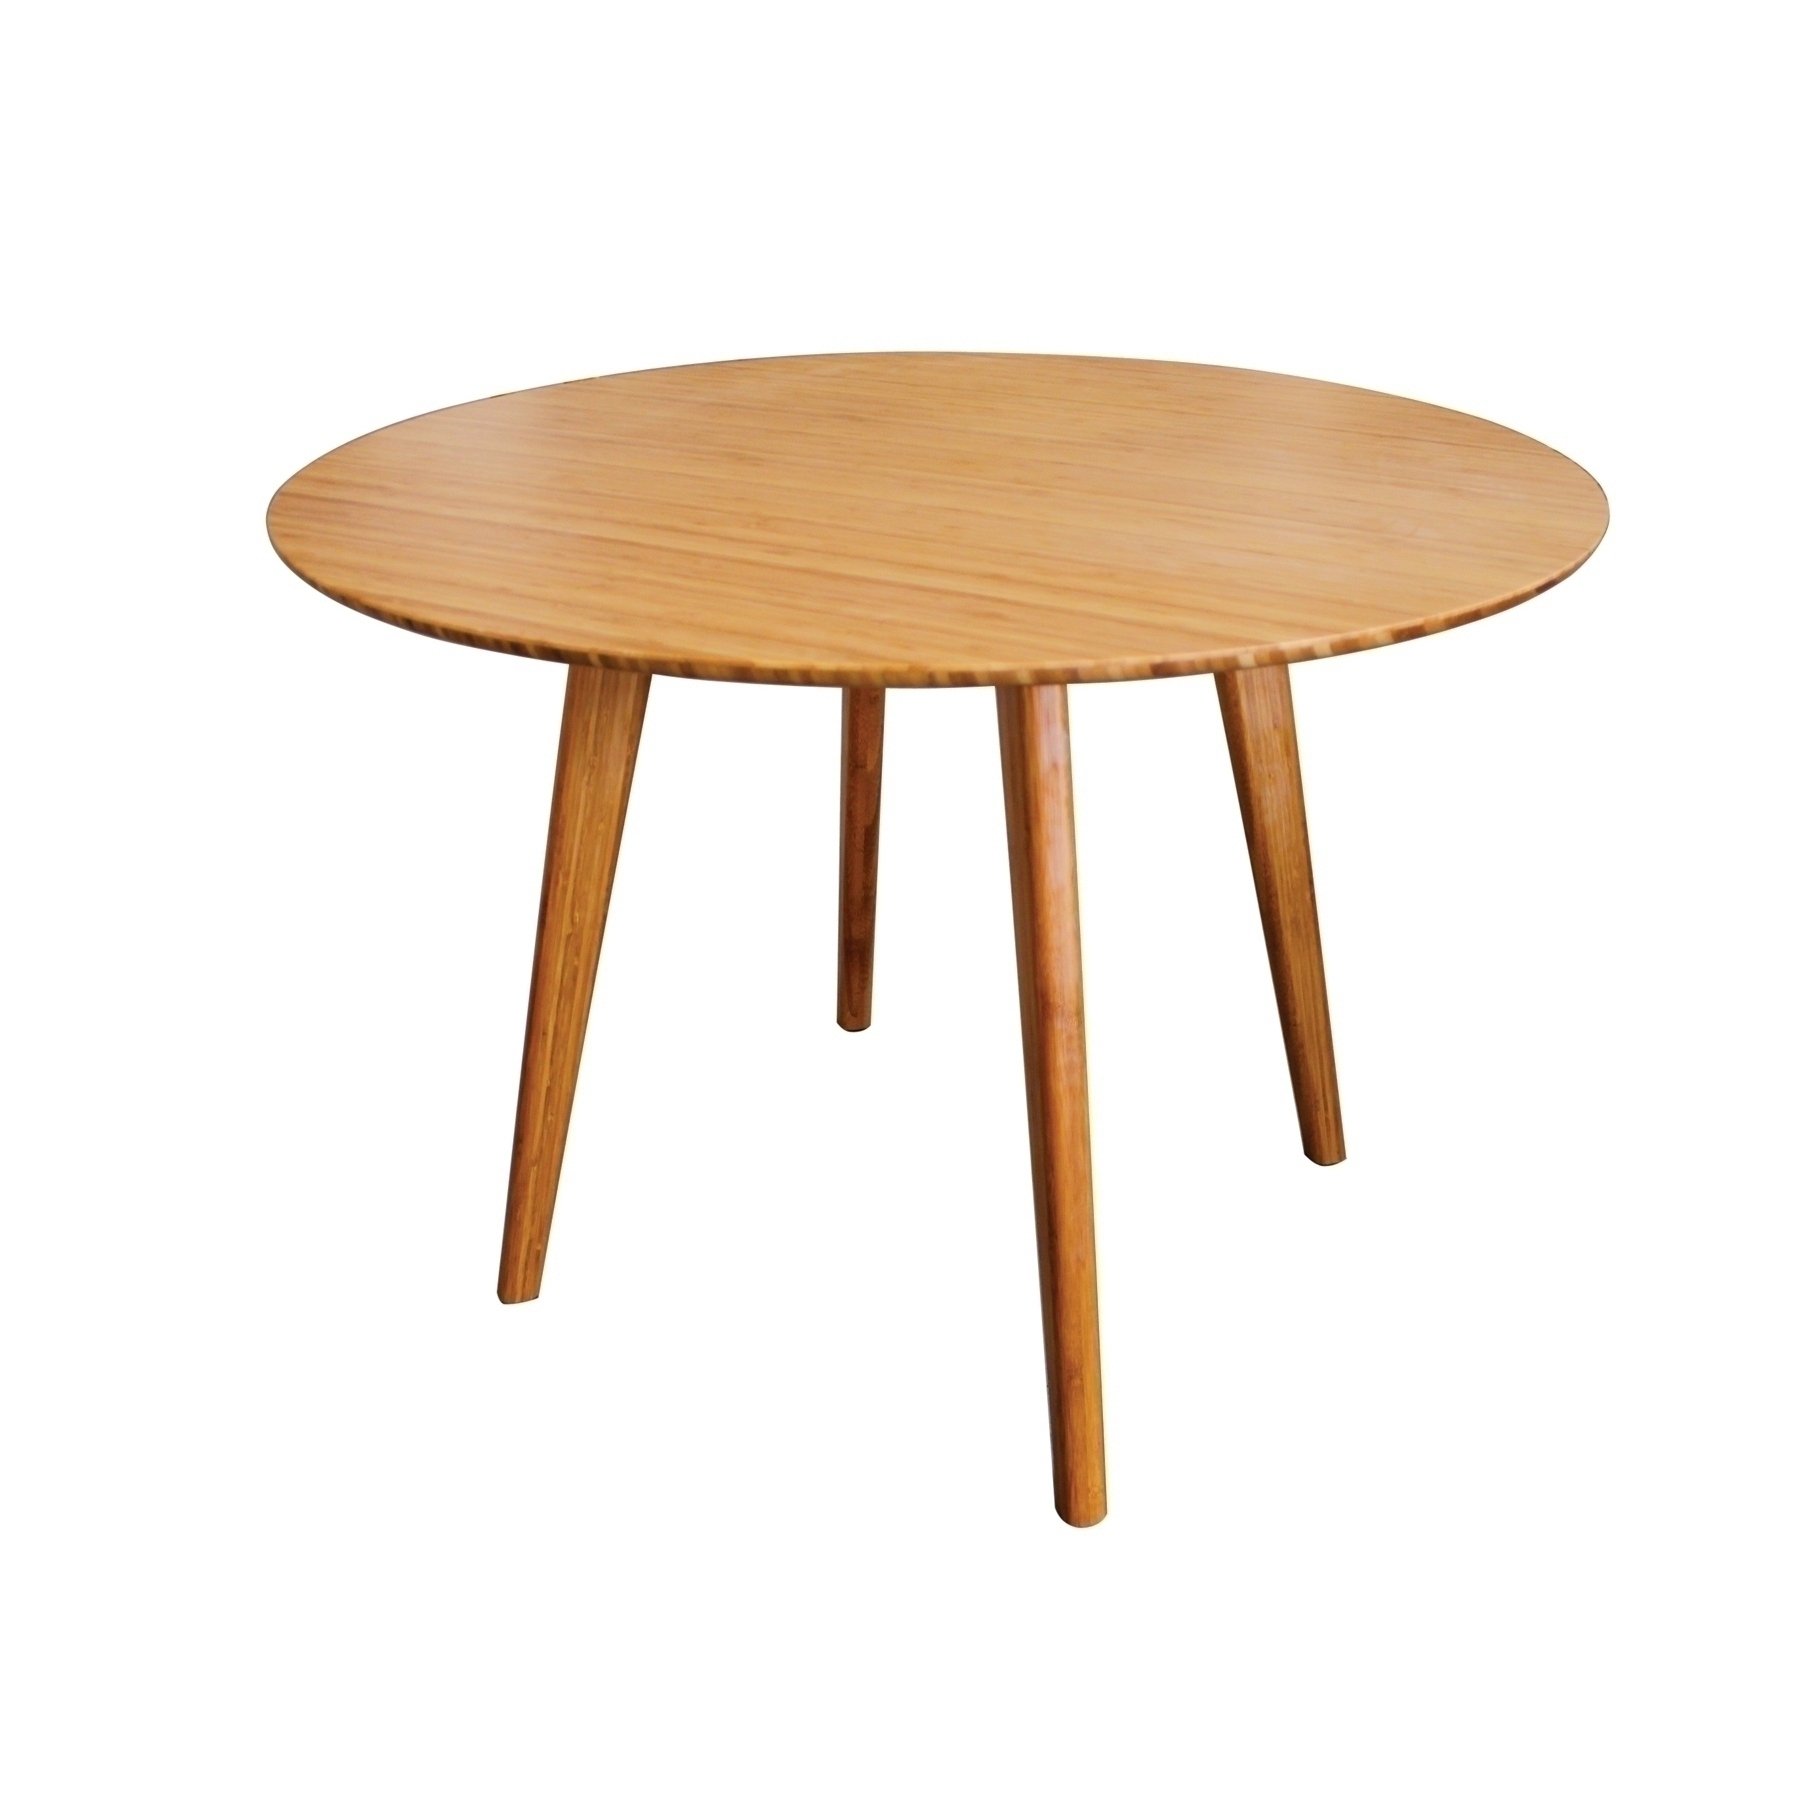 currant round dining table - caramelized